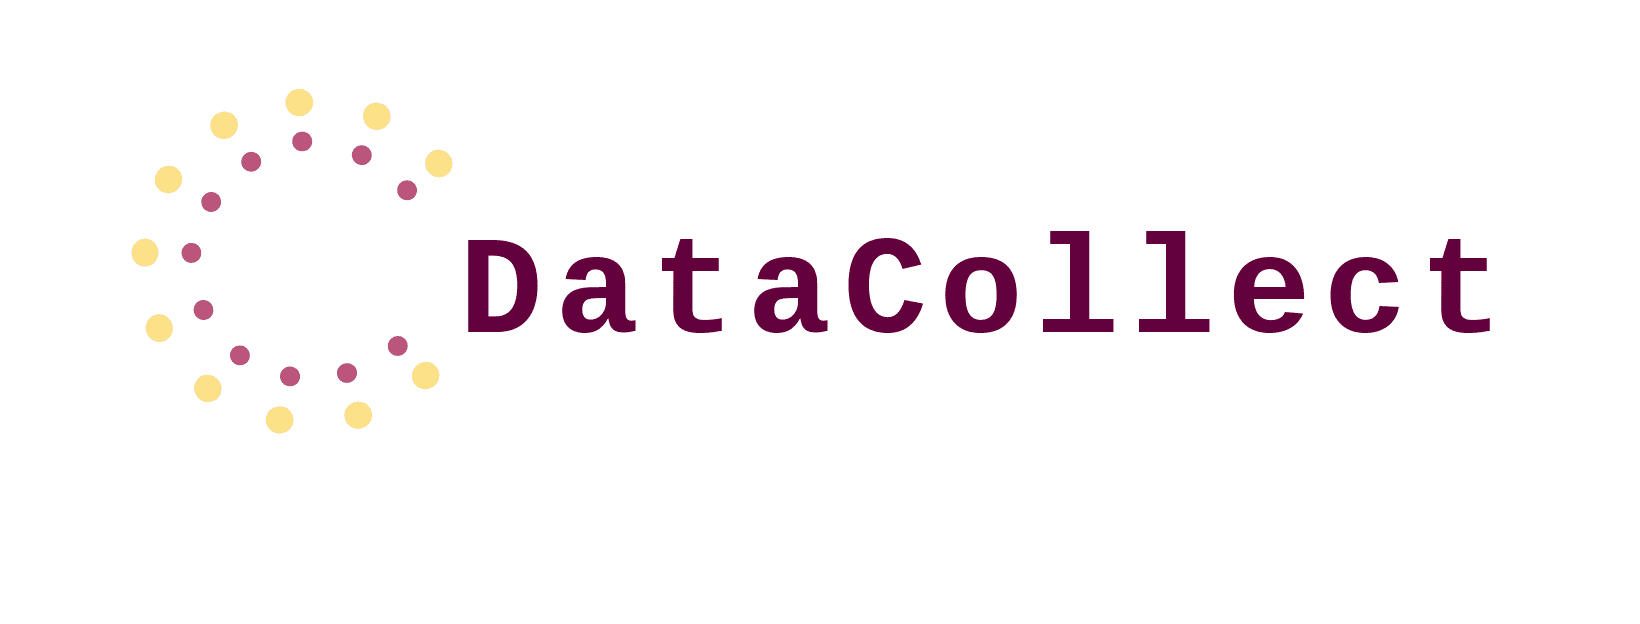 【DataCollect】ロゴ.png